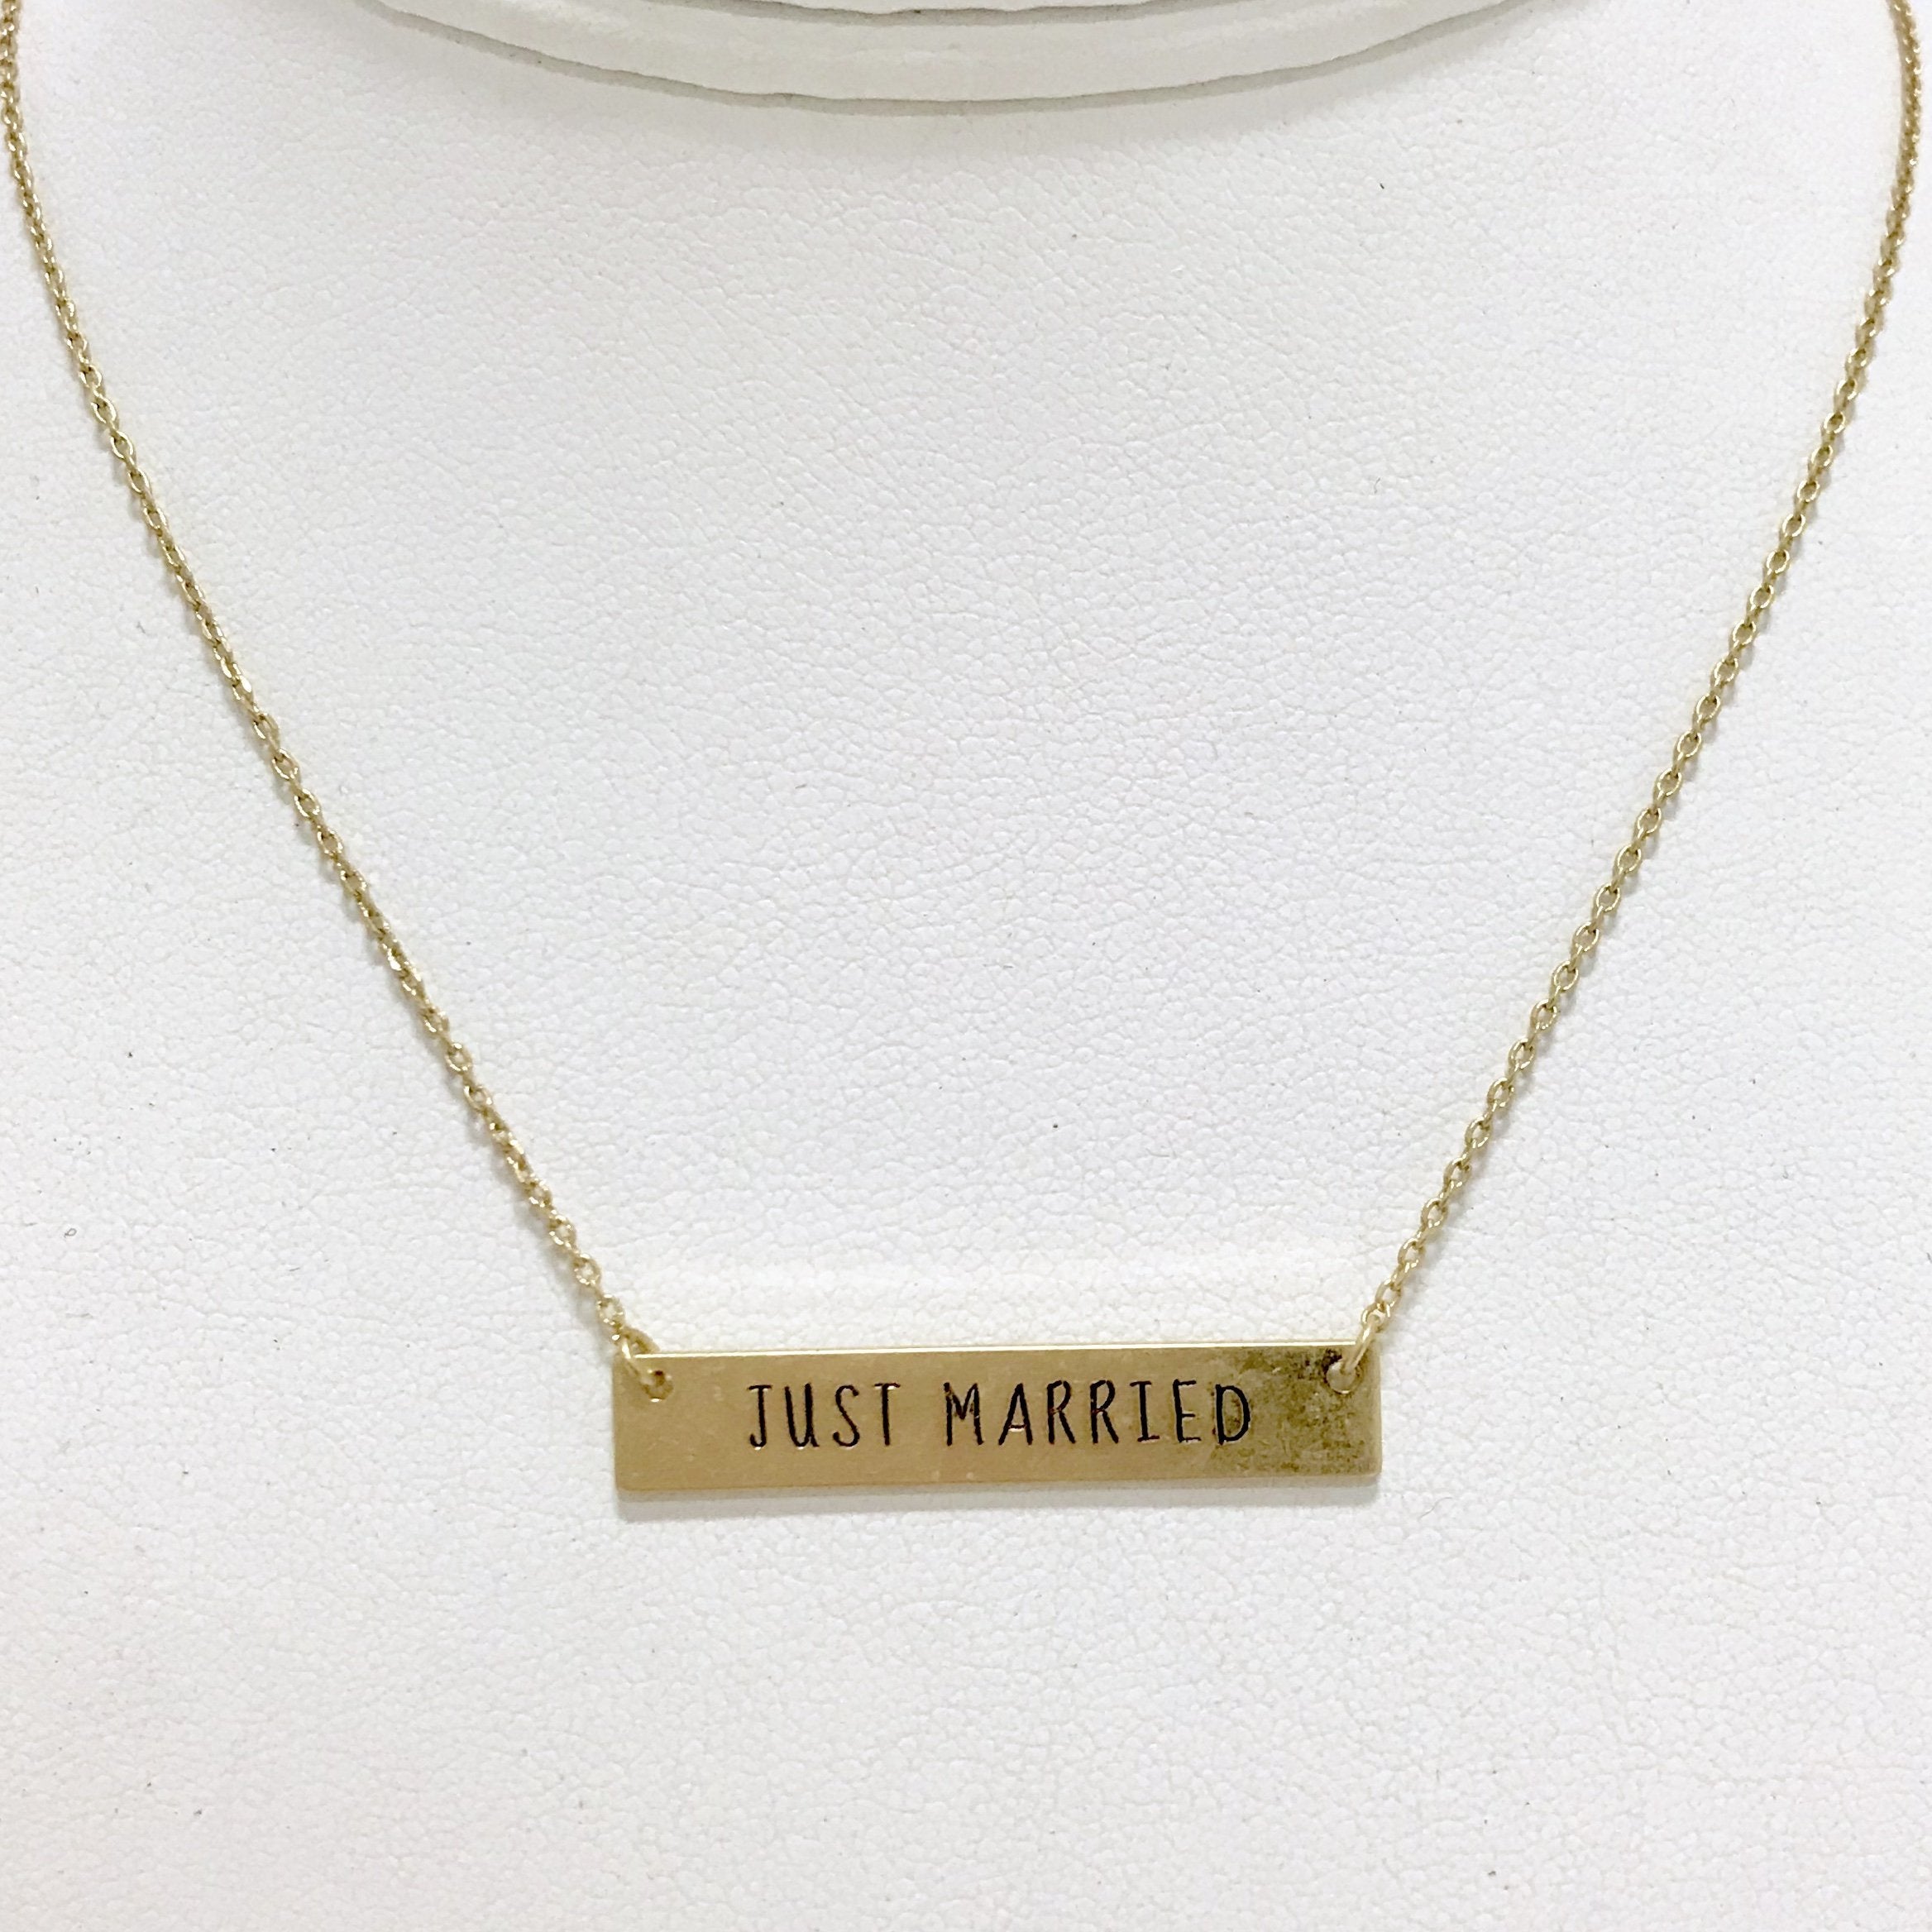 Just Married Gold Necklace - Dainty Hooligan